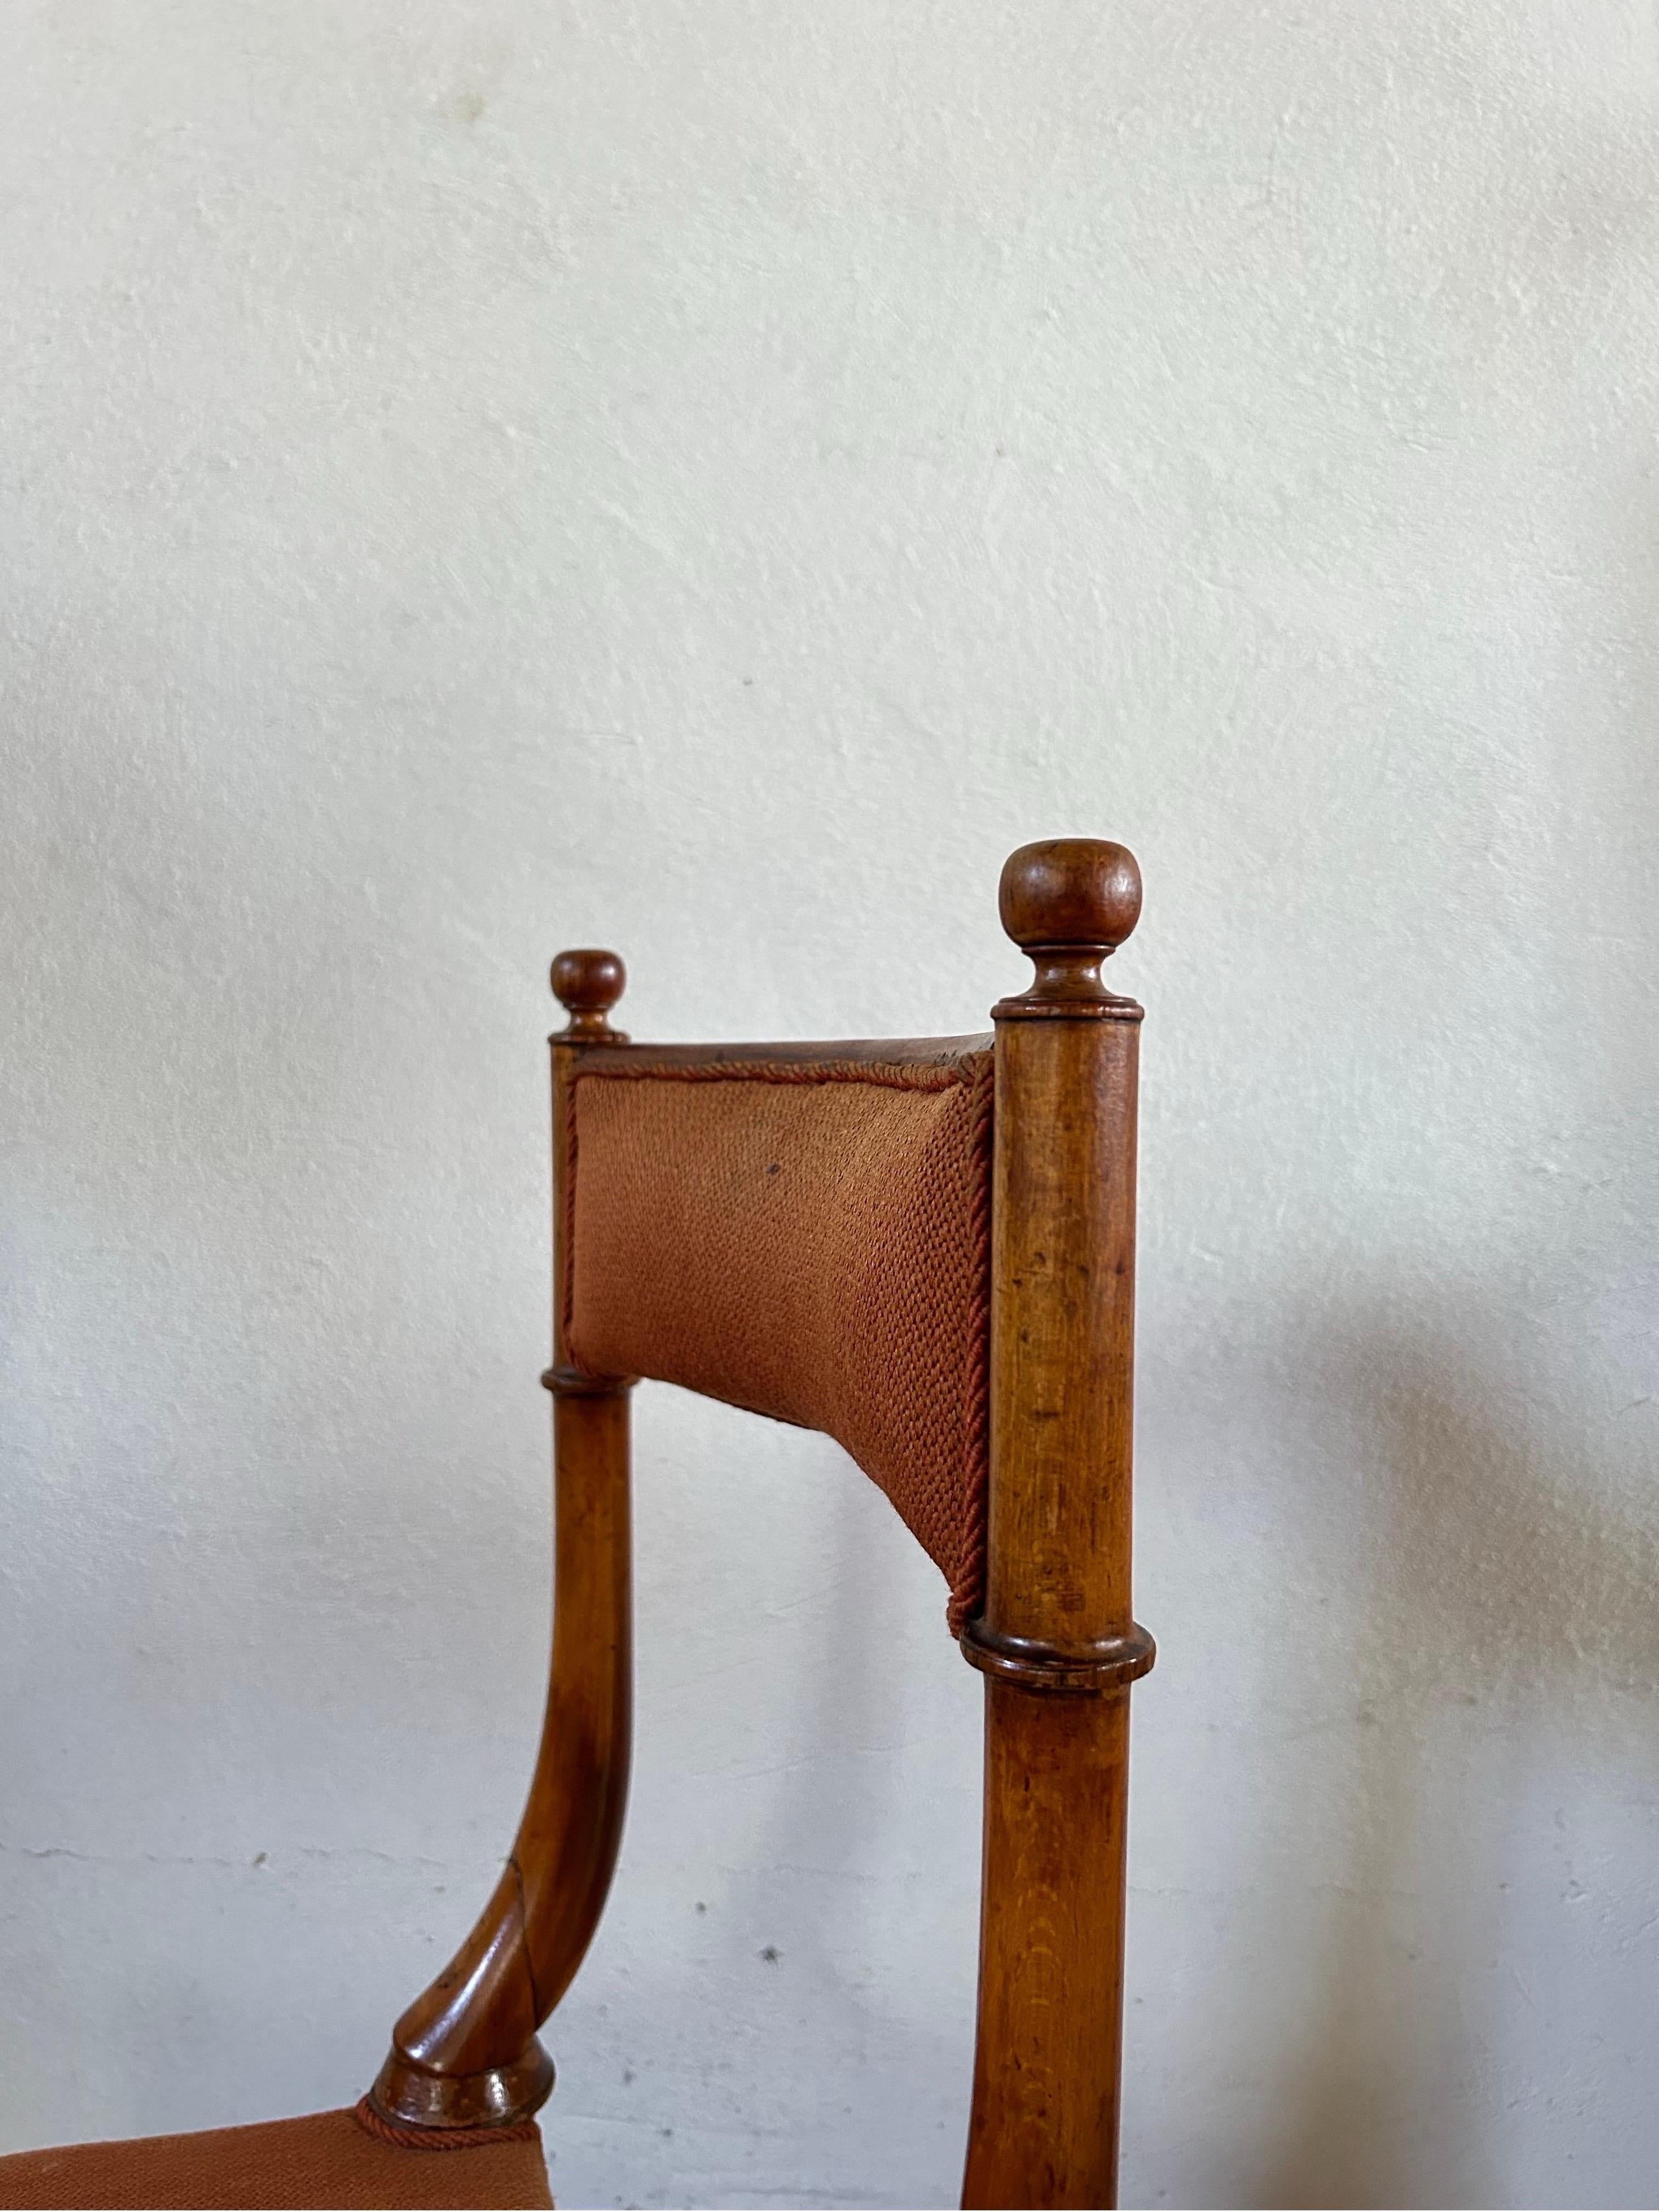 Rare and uncommon side chair crafted attributes to renowned artist Jørgen Roed in Denmark during the 1840s. With its exquisite craftsmanship and historical significance, this chair is a testament to the enduring legacy of Danish design